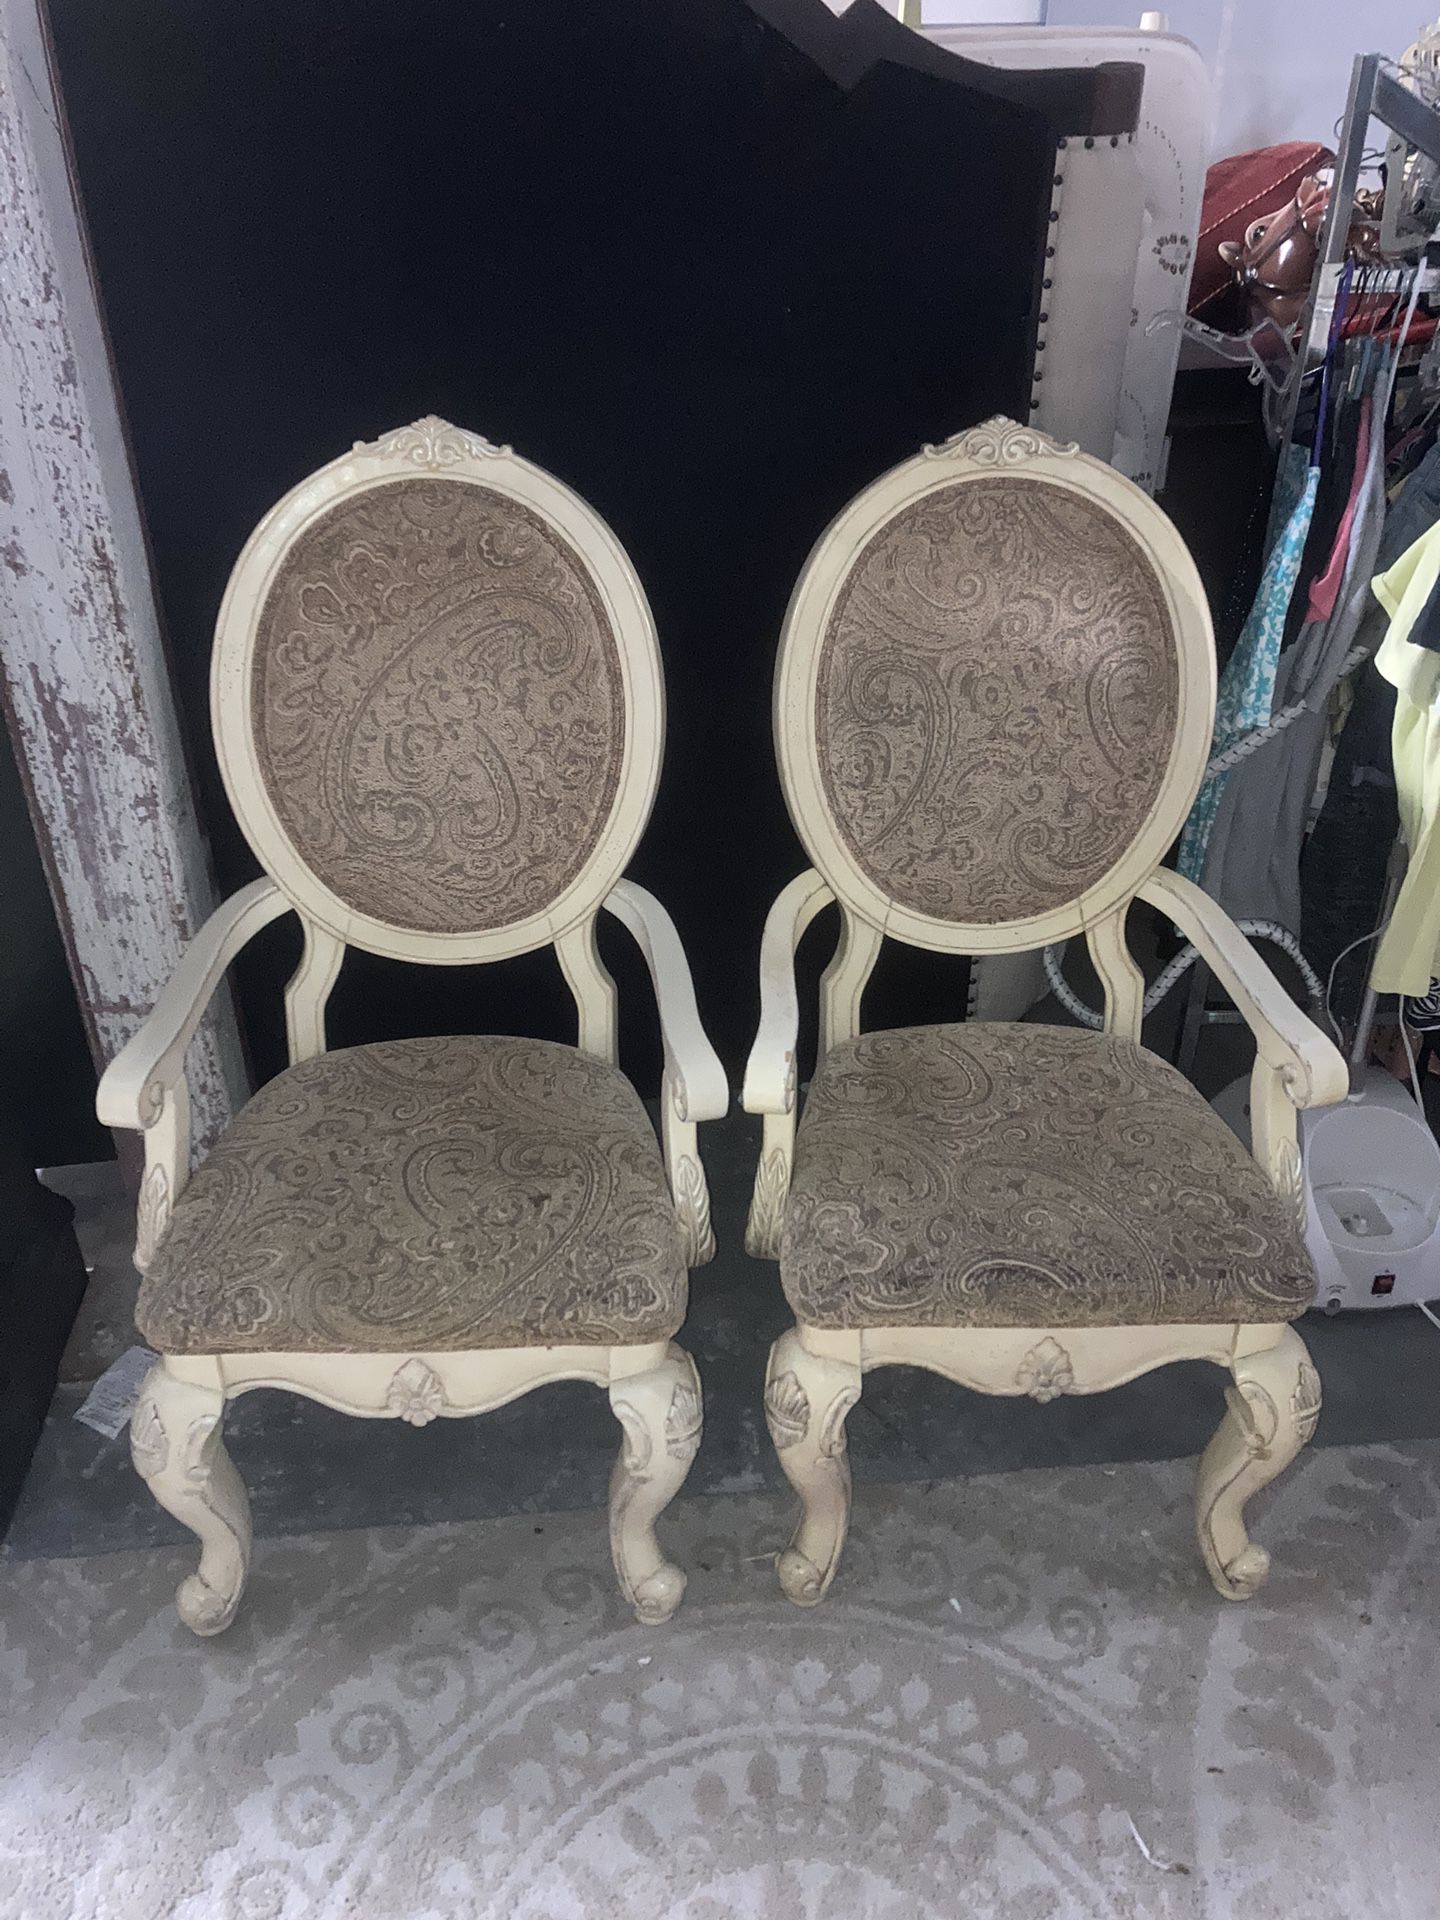 Chair’s, Matching, Set Of 2, $95Total, Color Is Very Neutral, Ghent Area